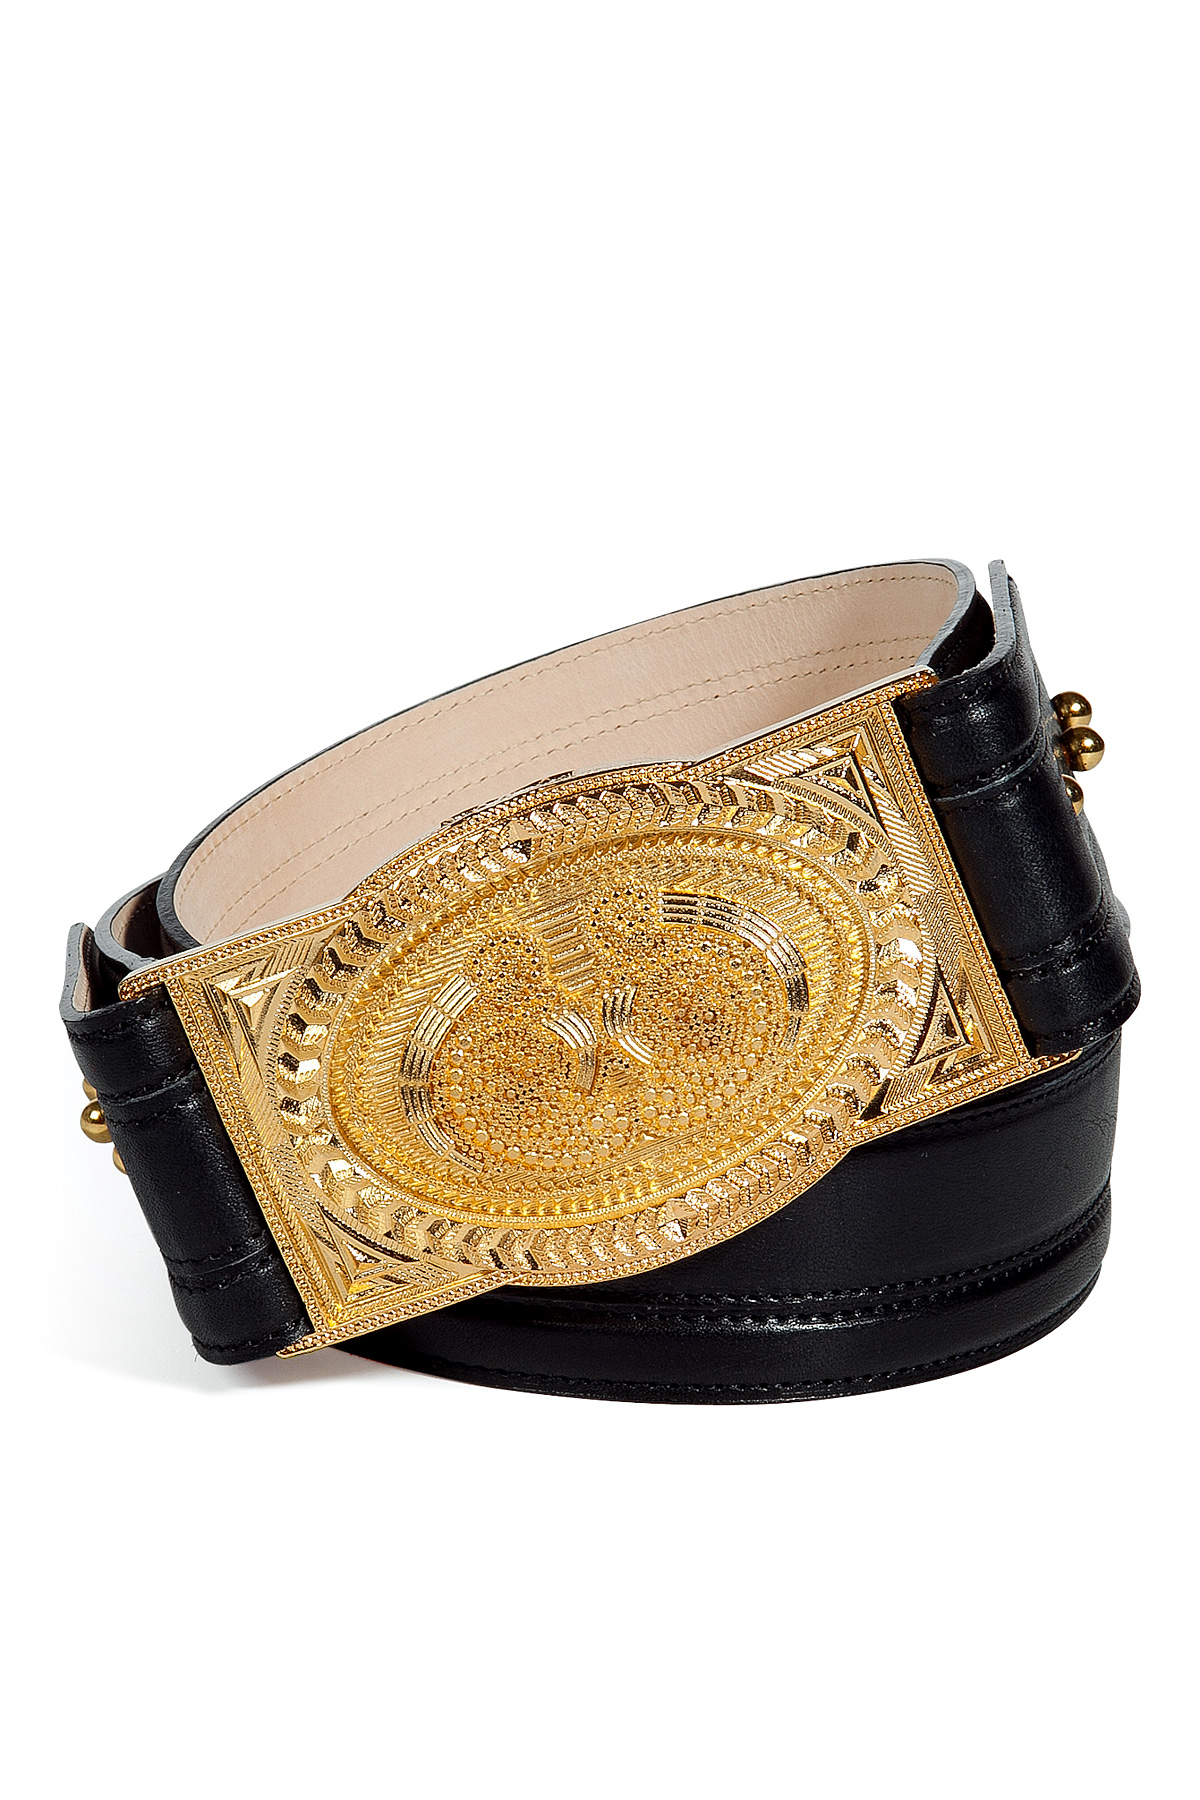 Balmain Black Leather Belt with Gold Buckle - Lyst